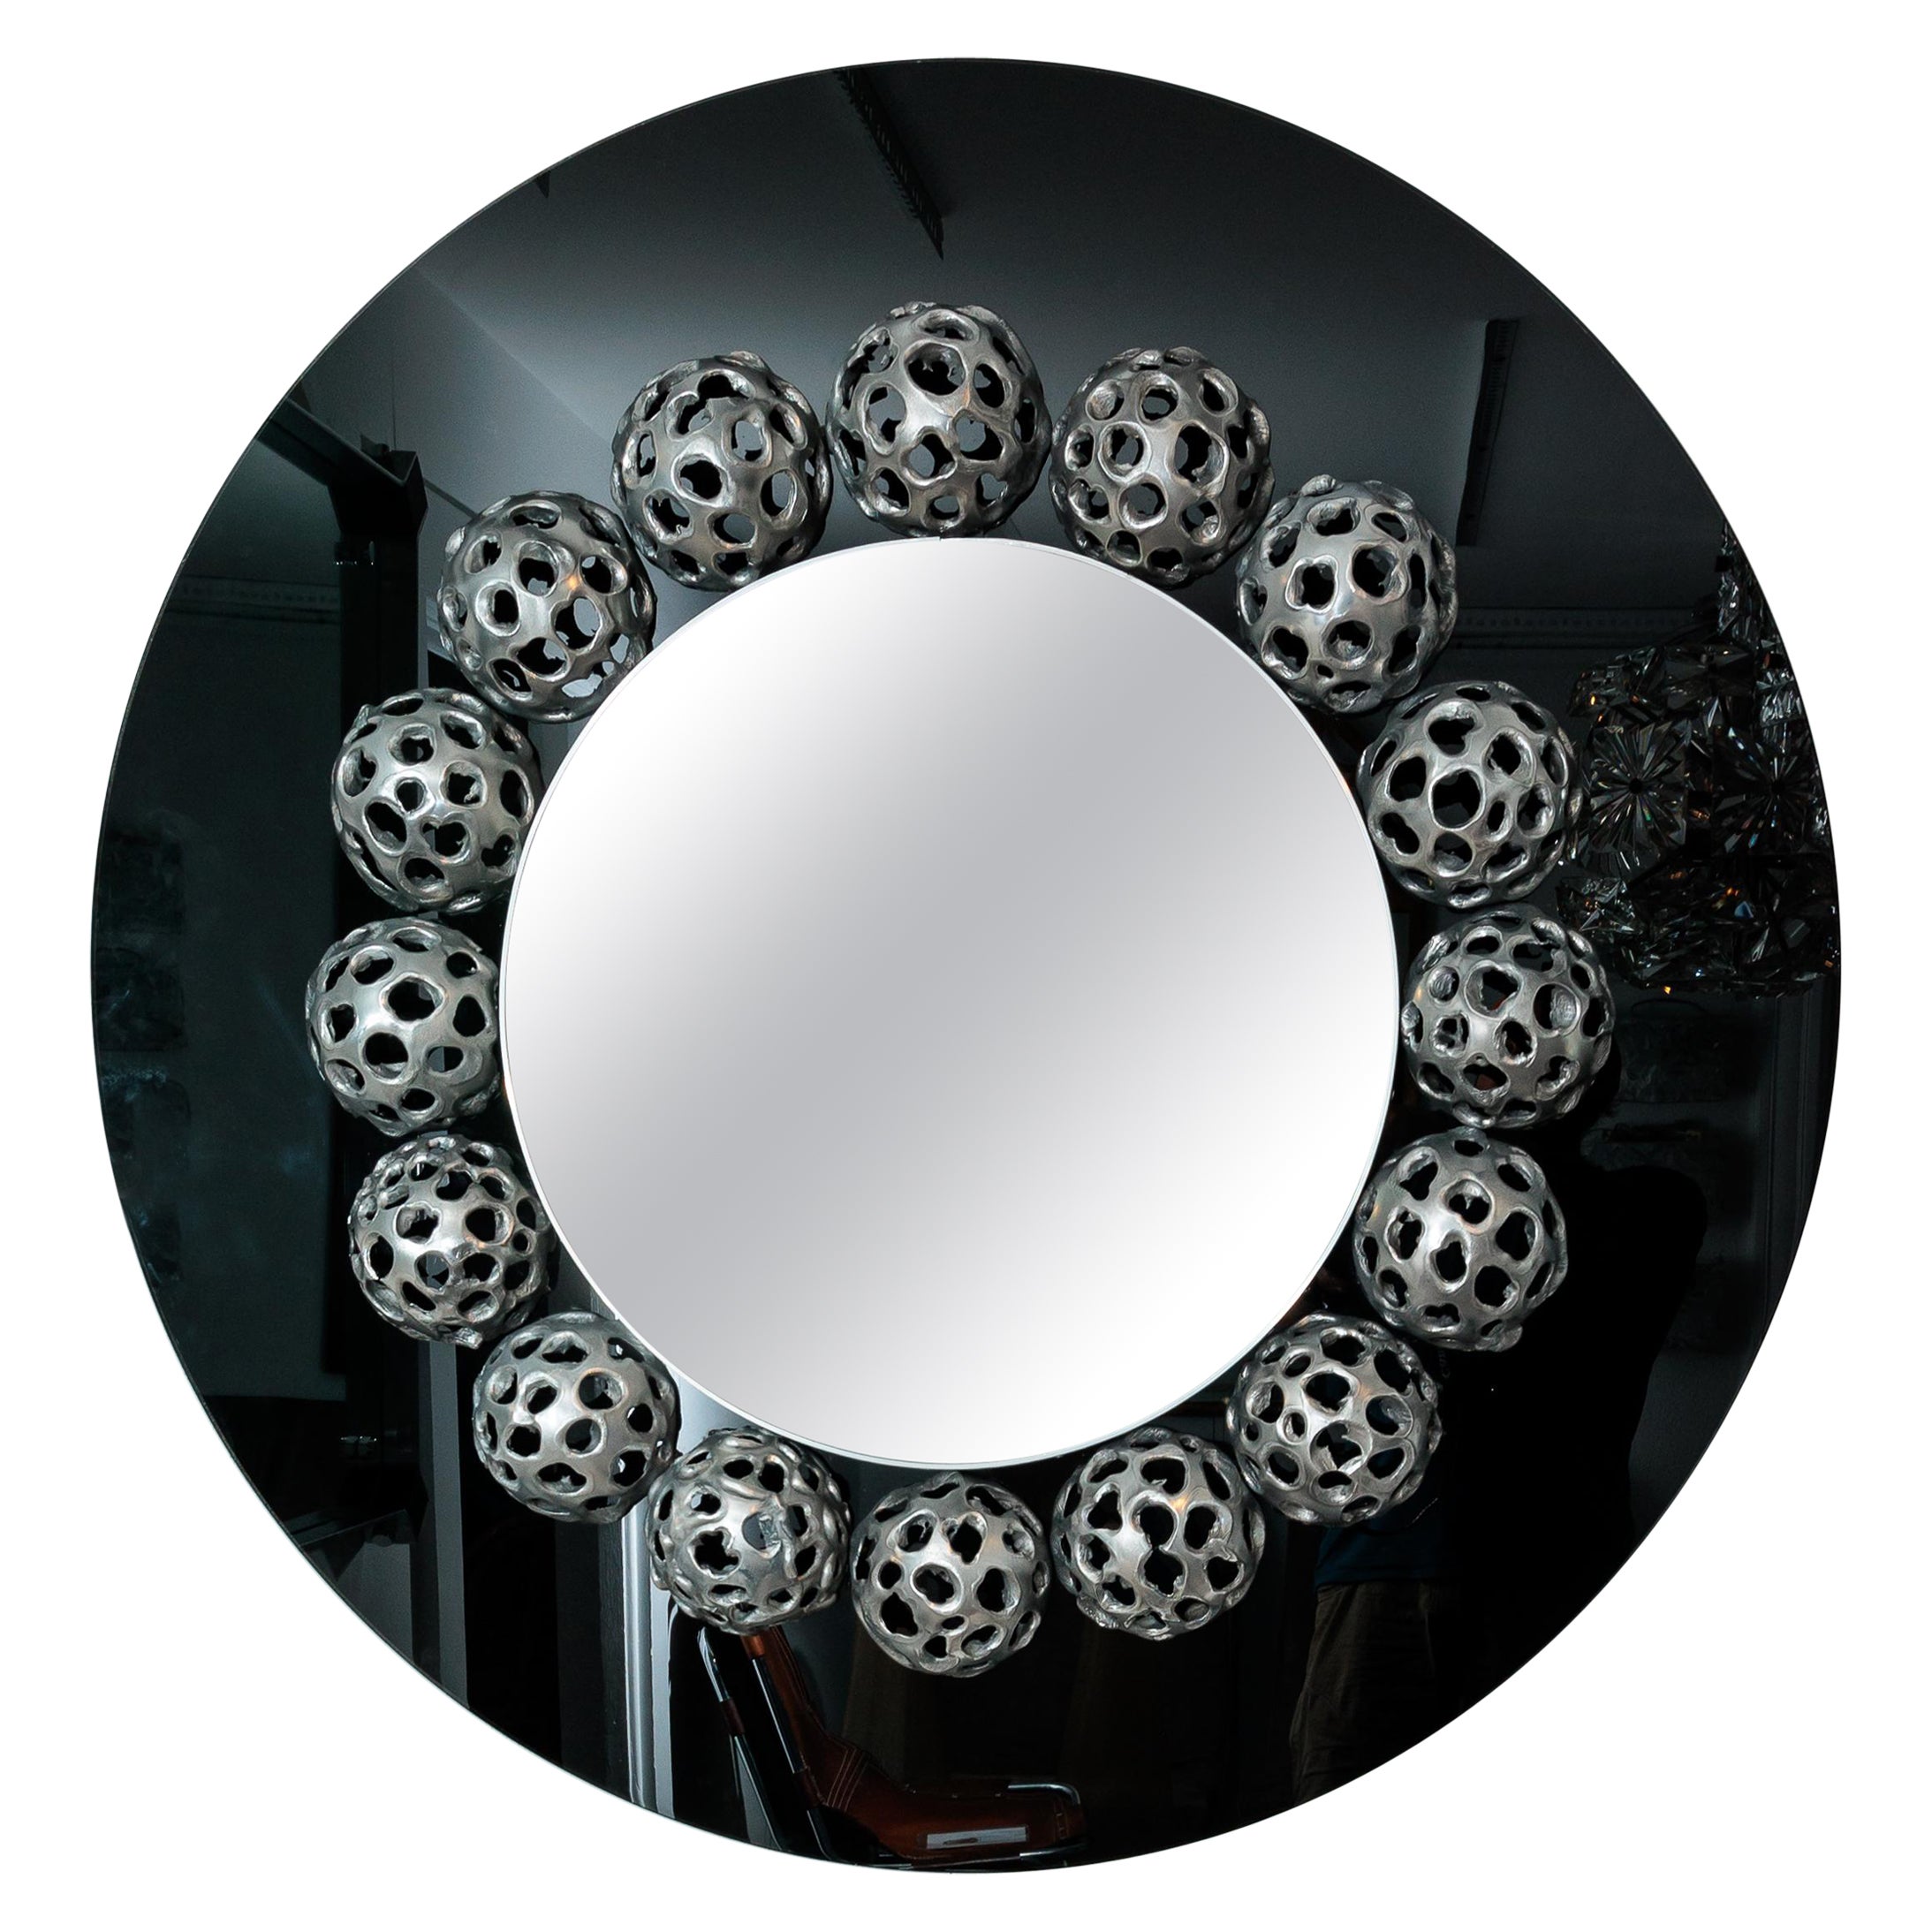 Round Mirror with 17 Metal Perforated Orbs on Black Glass For Sale